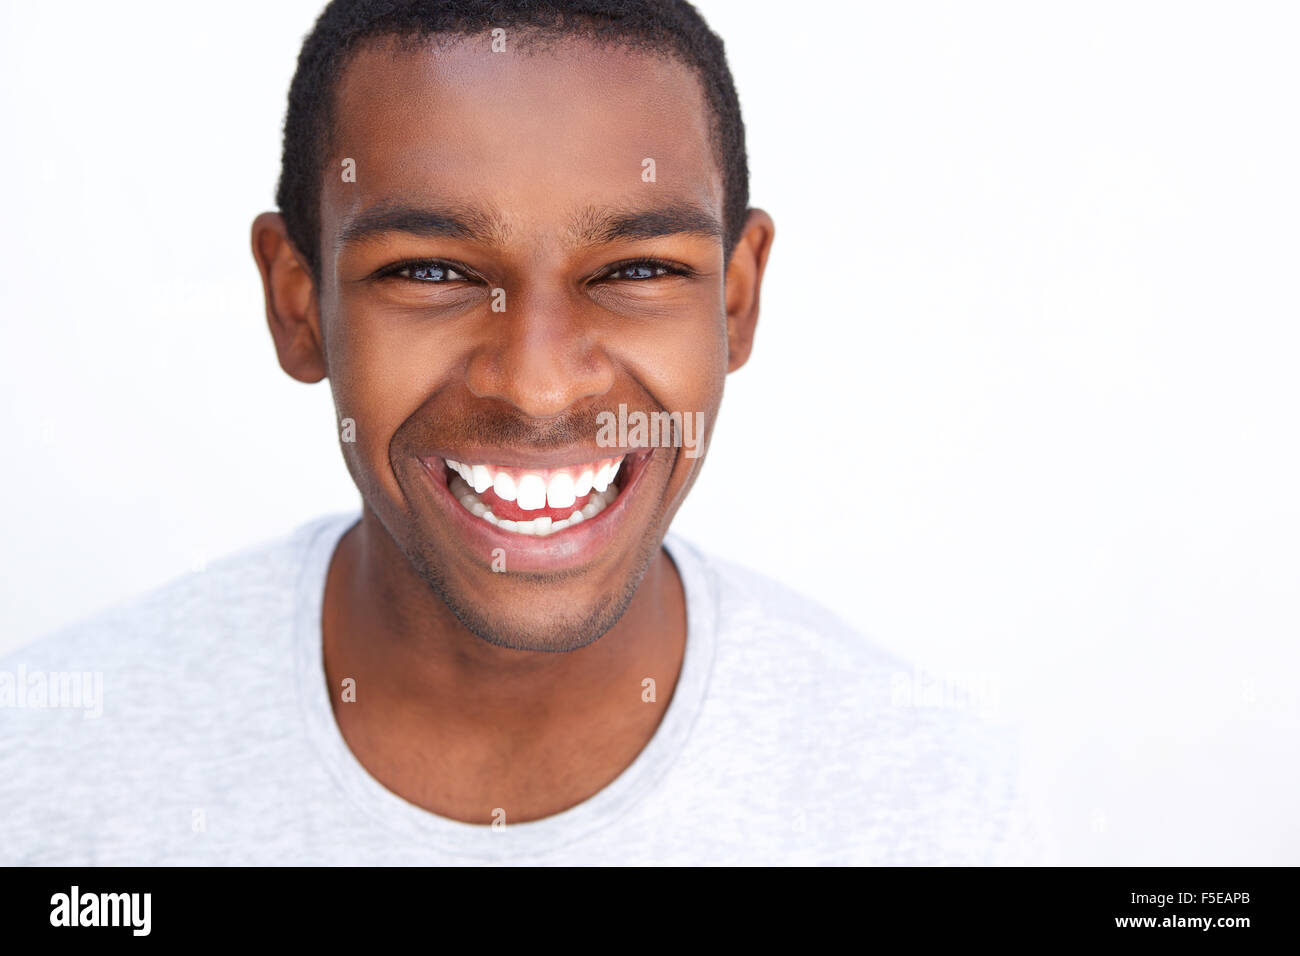 Close up portrait of a smiling teenage african american guy Stock Photo